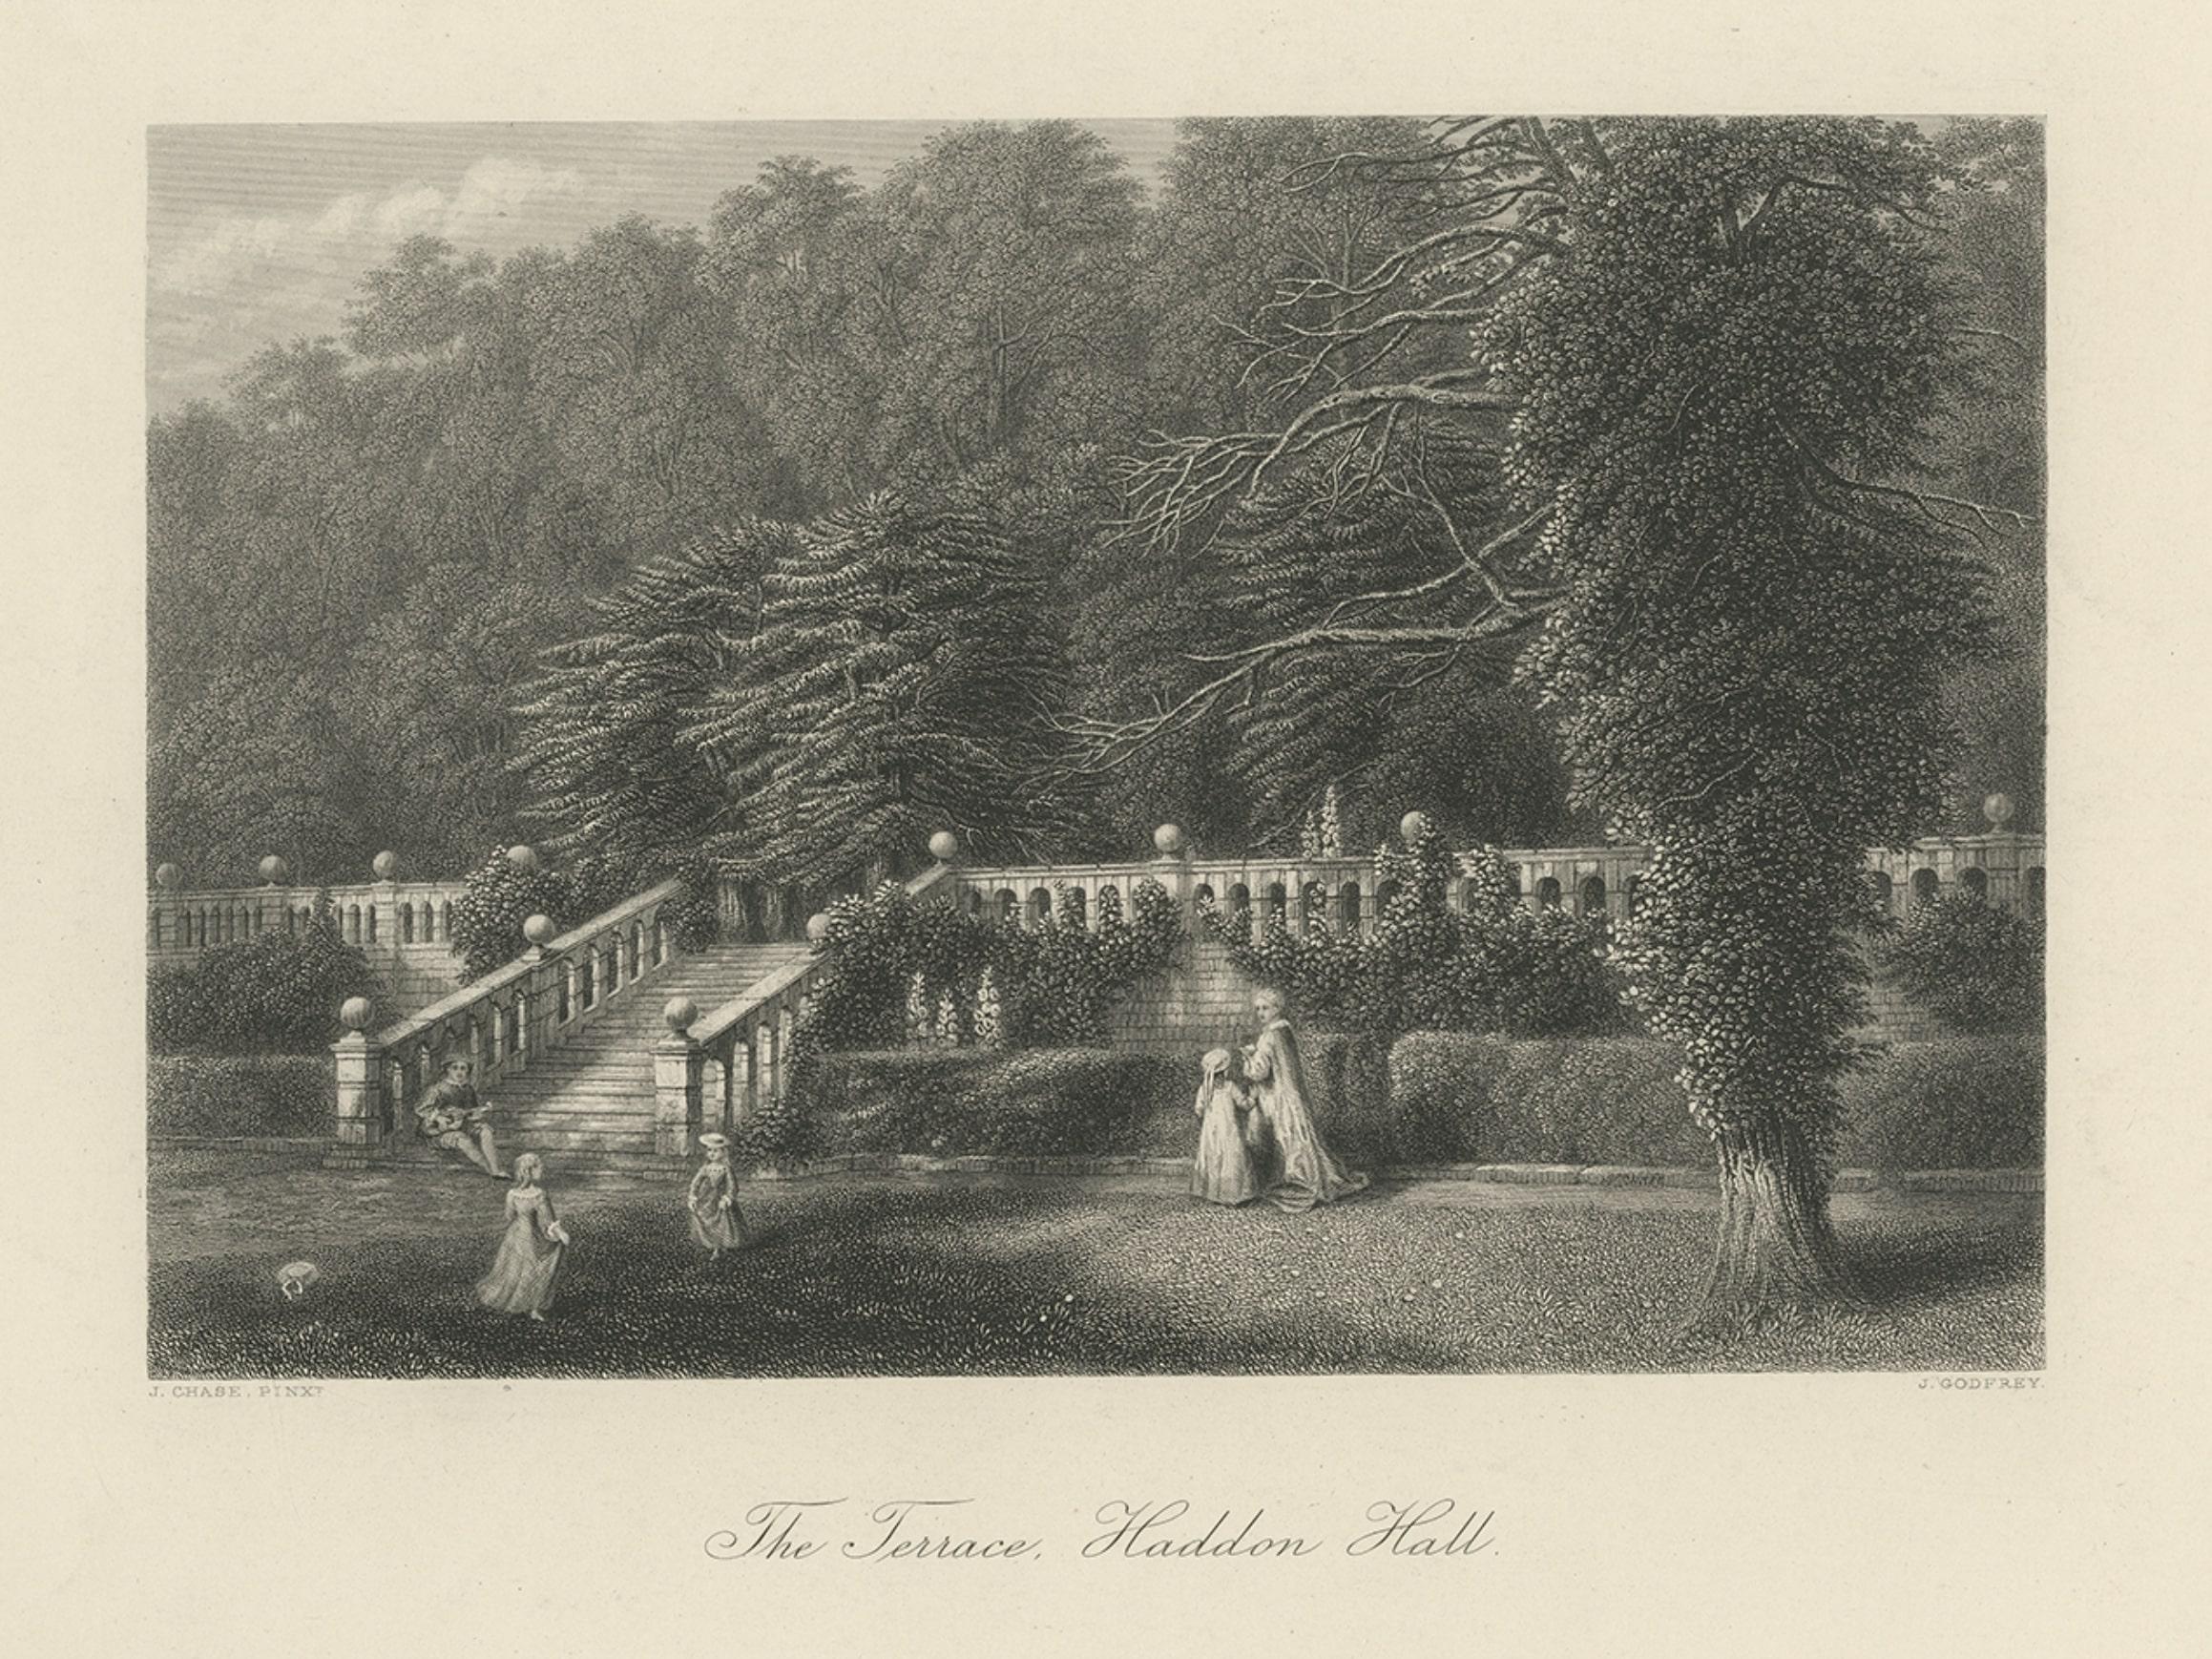 Antique print titled 'The Terrace, Haddon Hall'. 

Steel engraving of the terrace of Haddon Hall. Haddon Hall is an English country house on the River Wye near Bakewell, Derbyshire, a former seat of the Dukes of Rutland. This print originates from